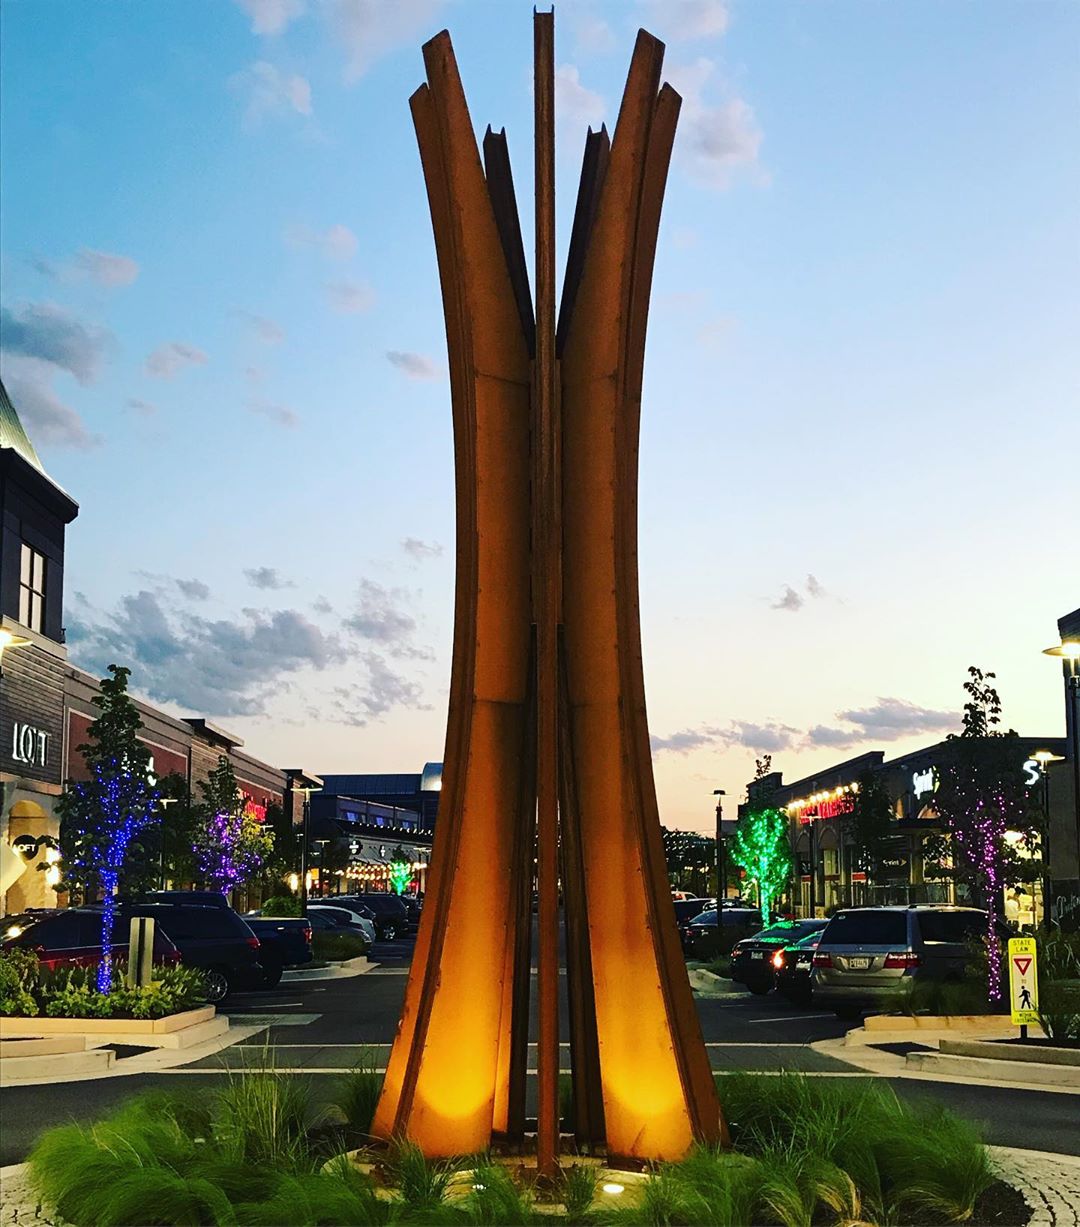 roundabout structure that was constructed at The Avenue at White Marsh mall in White Marsh, MD photo by Instagram user @theavenueatwhitemarsh